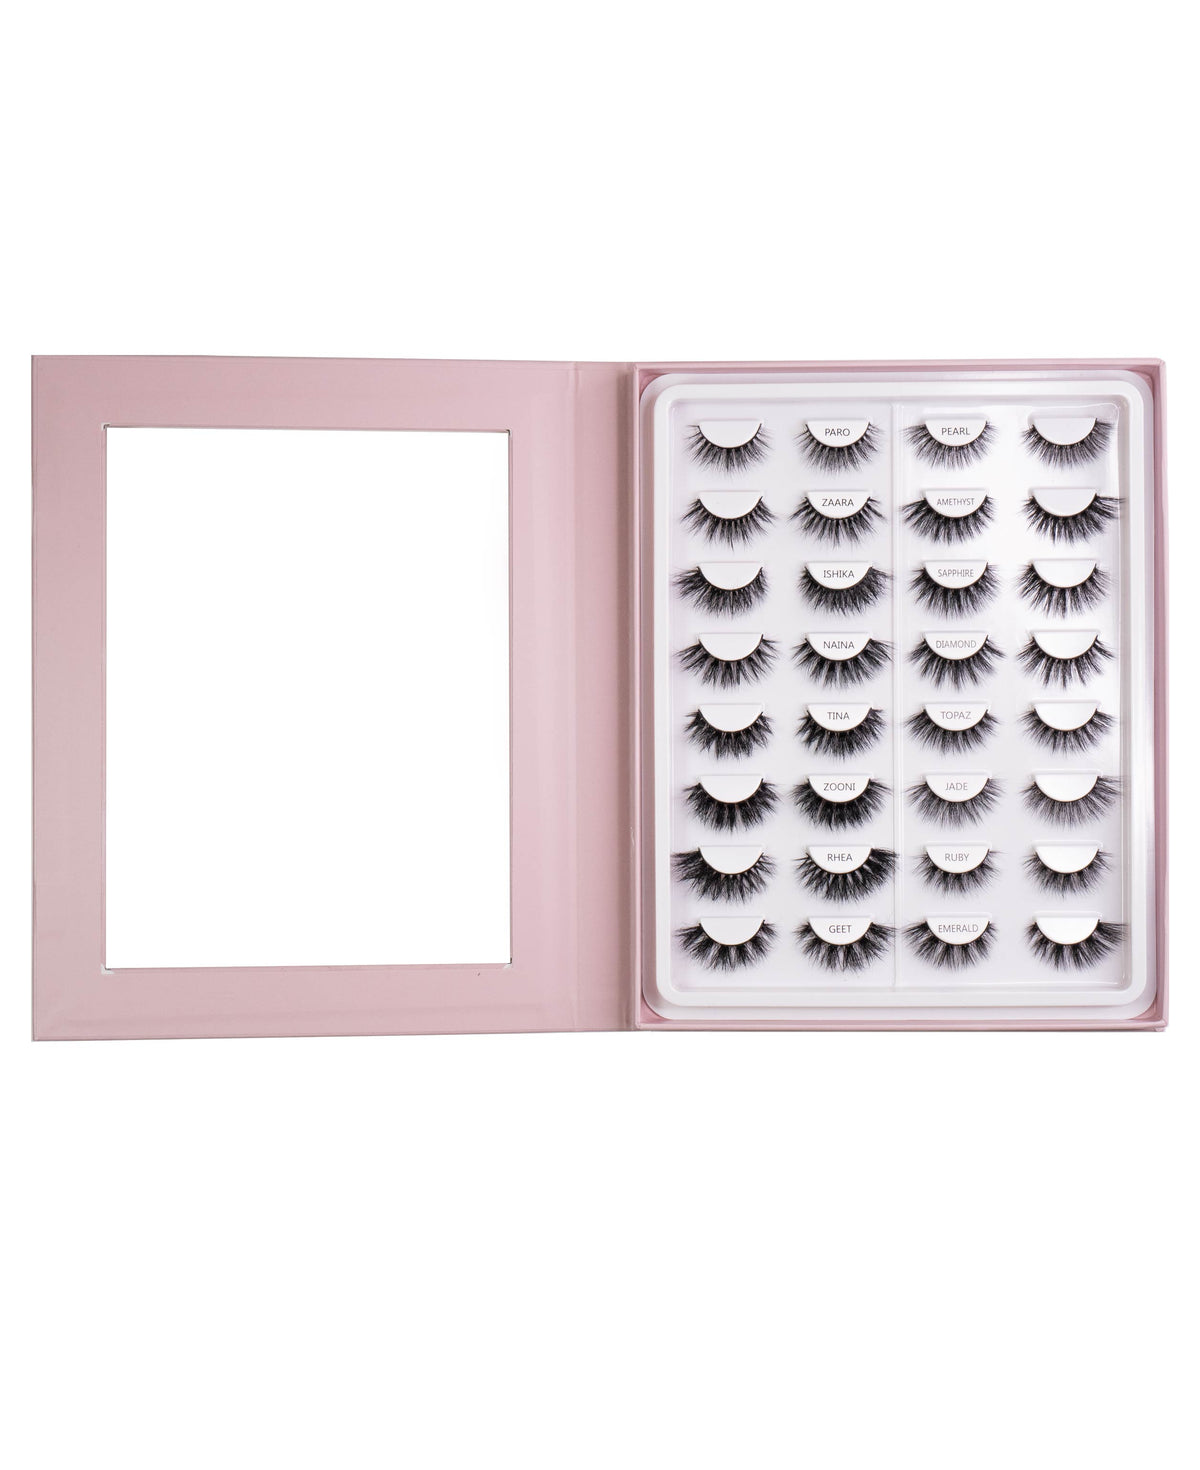 All-In-One Lash Book